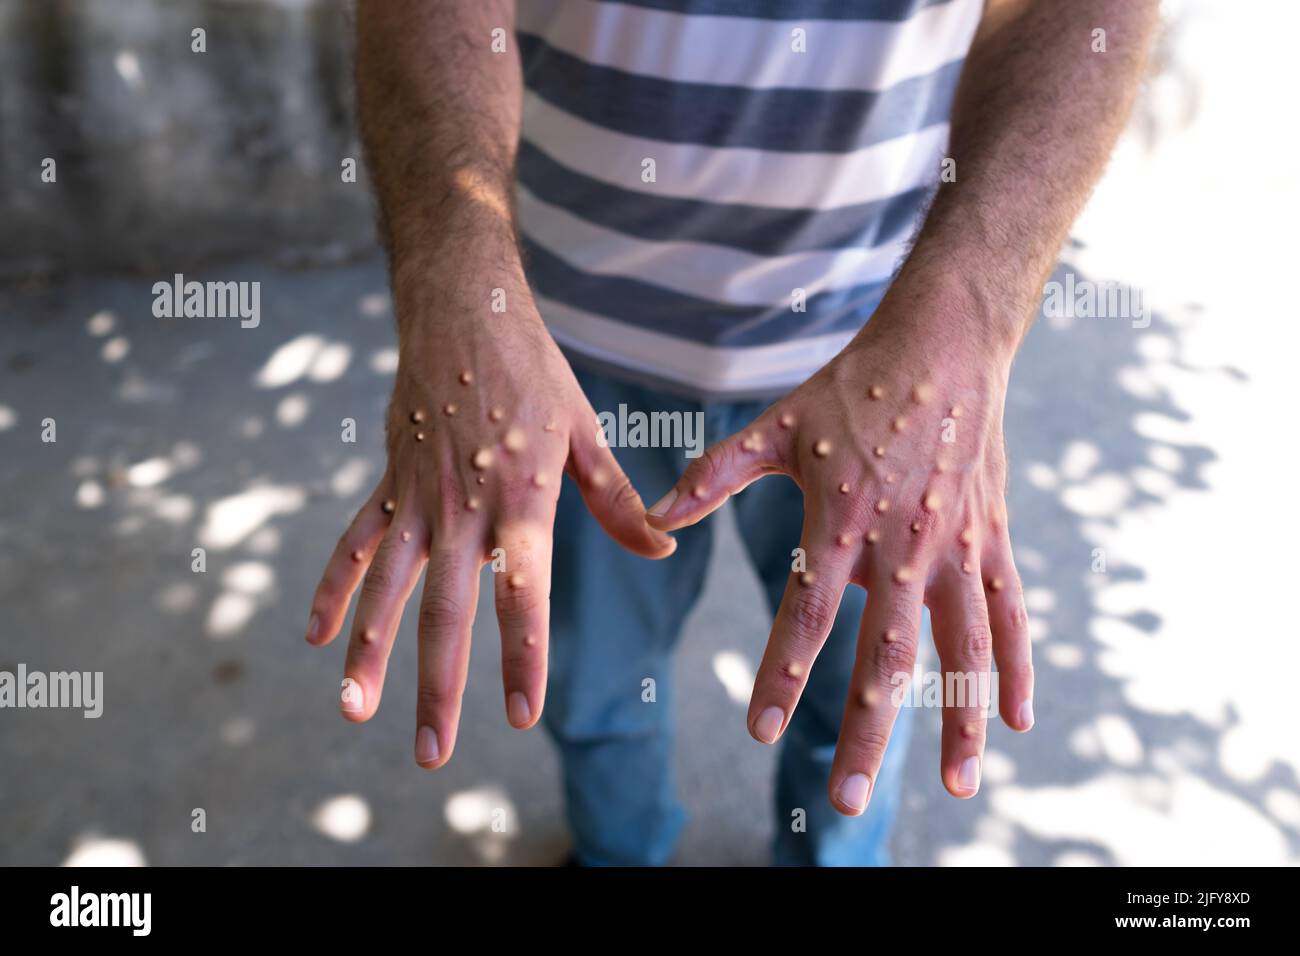 hands affected by smallpox. Man with blisters on his hands from monkeypox. Stock Photo